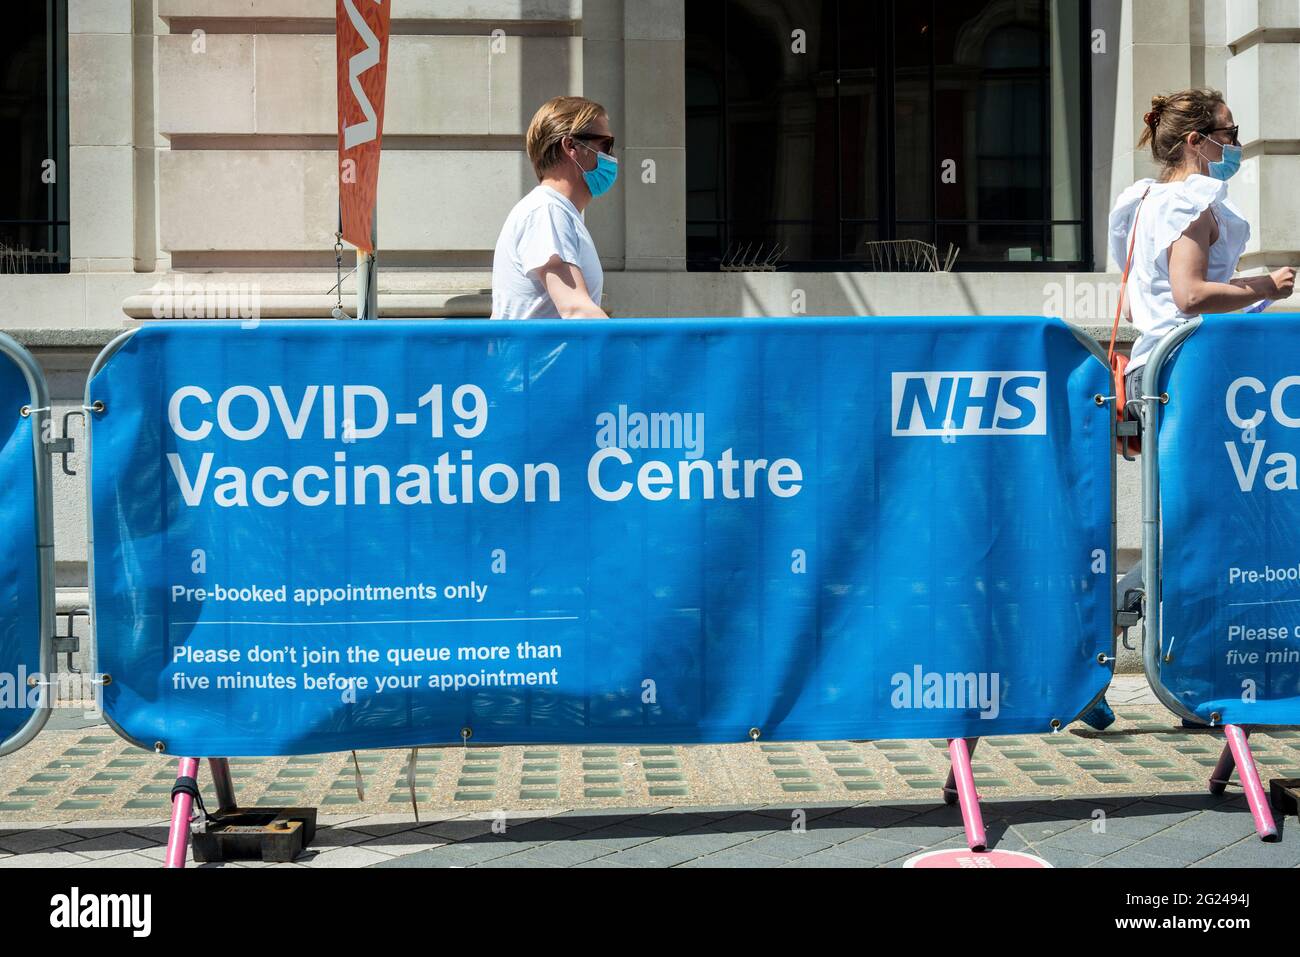 London, UK.  8 June 2021.  People arrive at an NHS vaccination centre at the Science Museum in South Kensington.  The UK government has announced that over 25s can now receive the coronavirus vaccine. Concerns about the impact of the so-called Indian variant on full relaxation of lockdown restrictions on June 21 continue. Credit: Stephen Chung / Alamy Live News Stock Photo